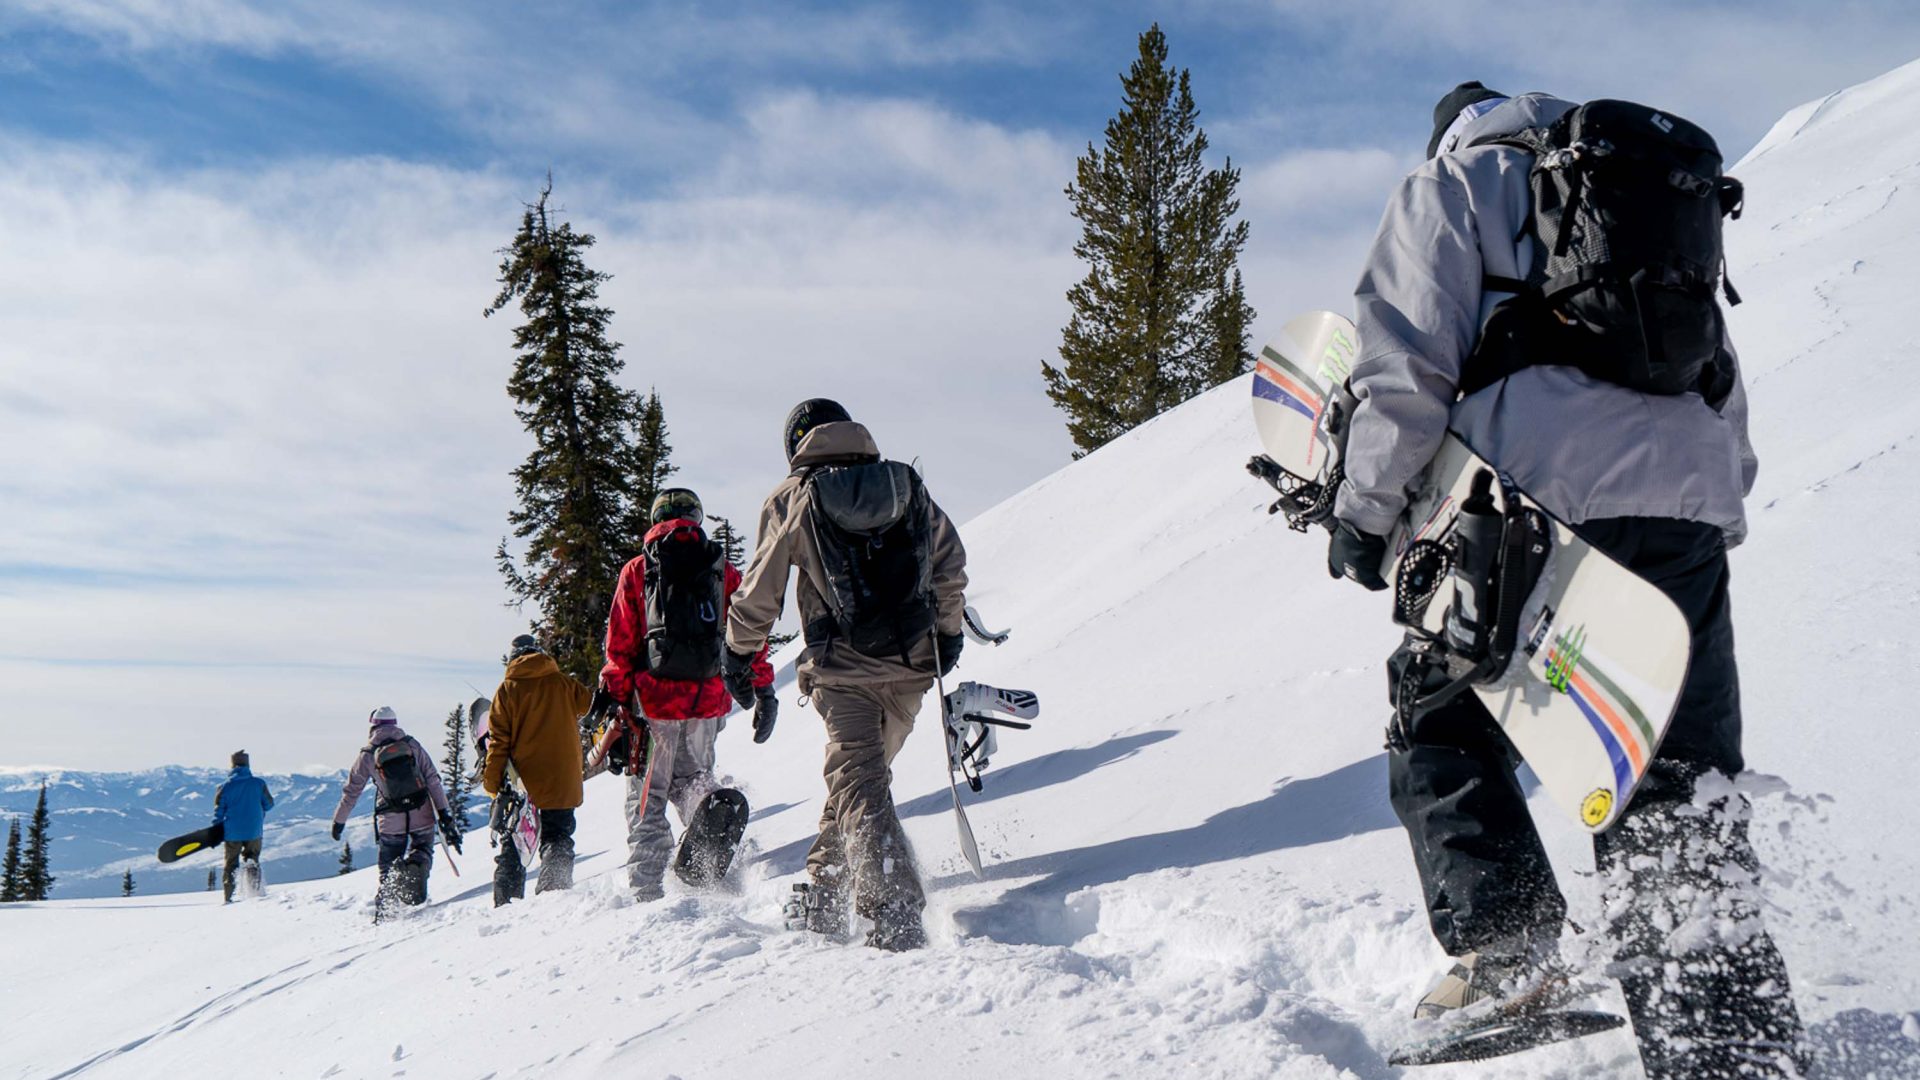 A single file of snowboarders traverses the mountain.